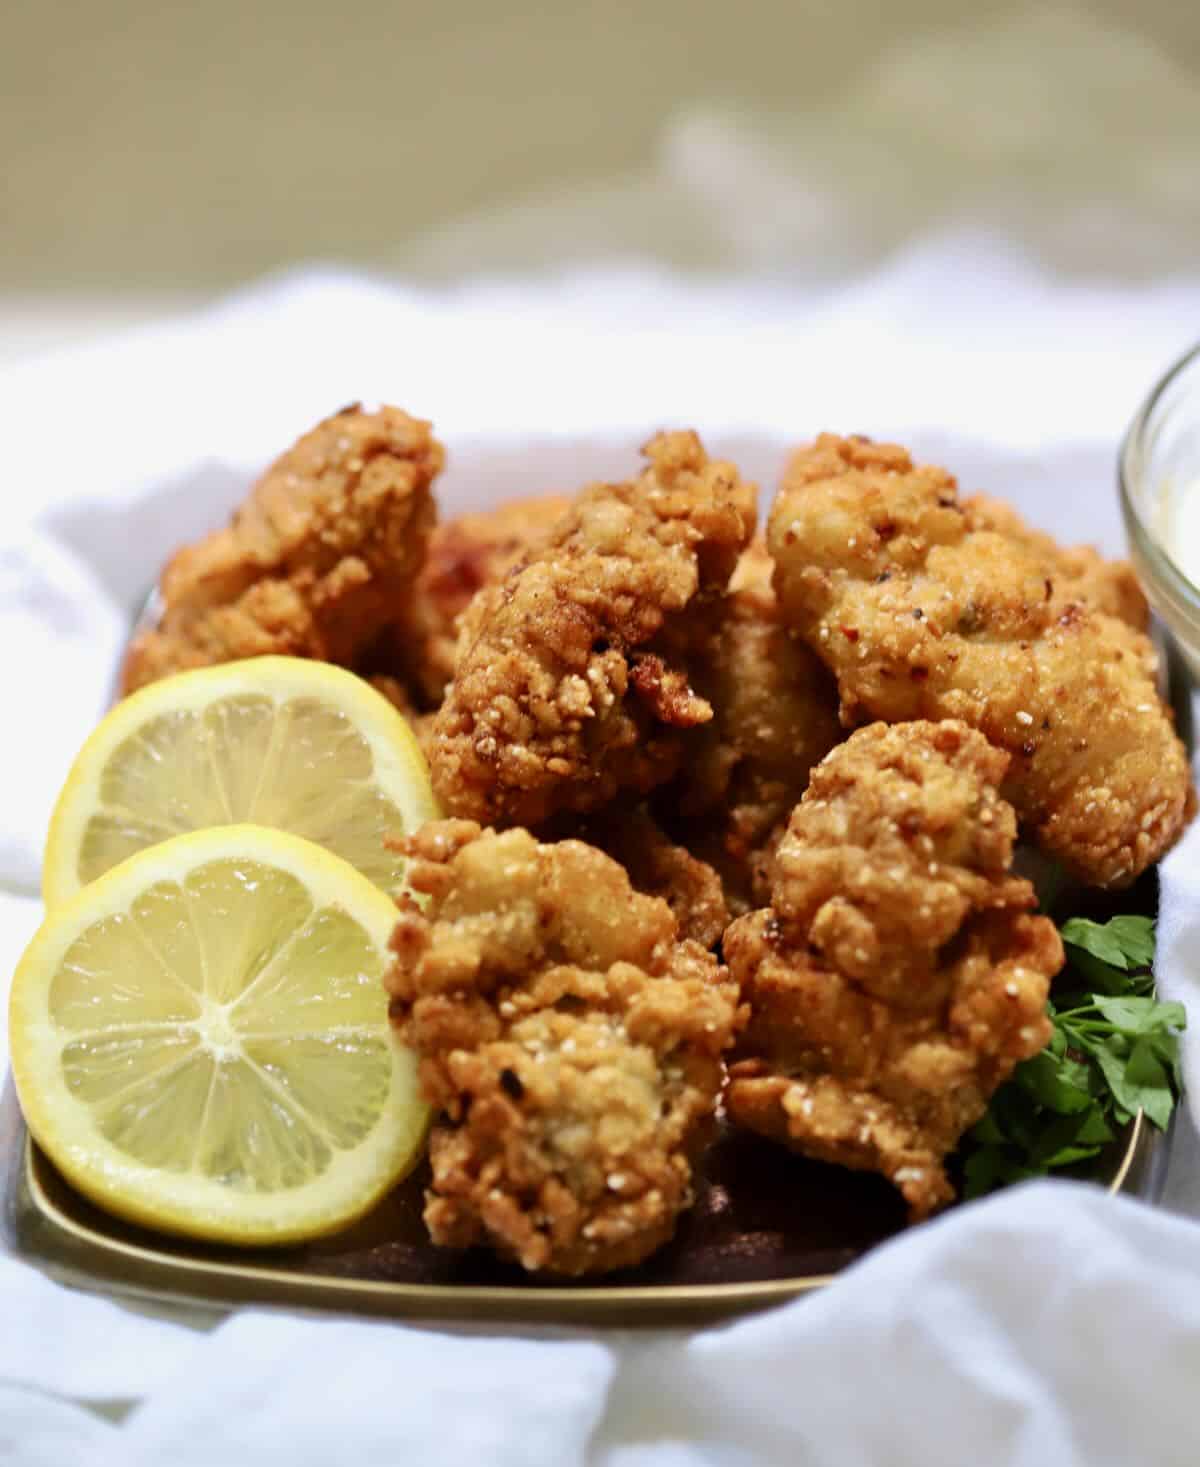 Fried oysters on a bronze plate garnished with lemon slices. 